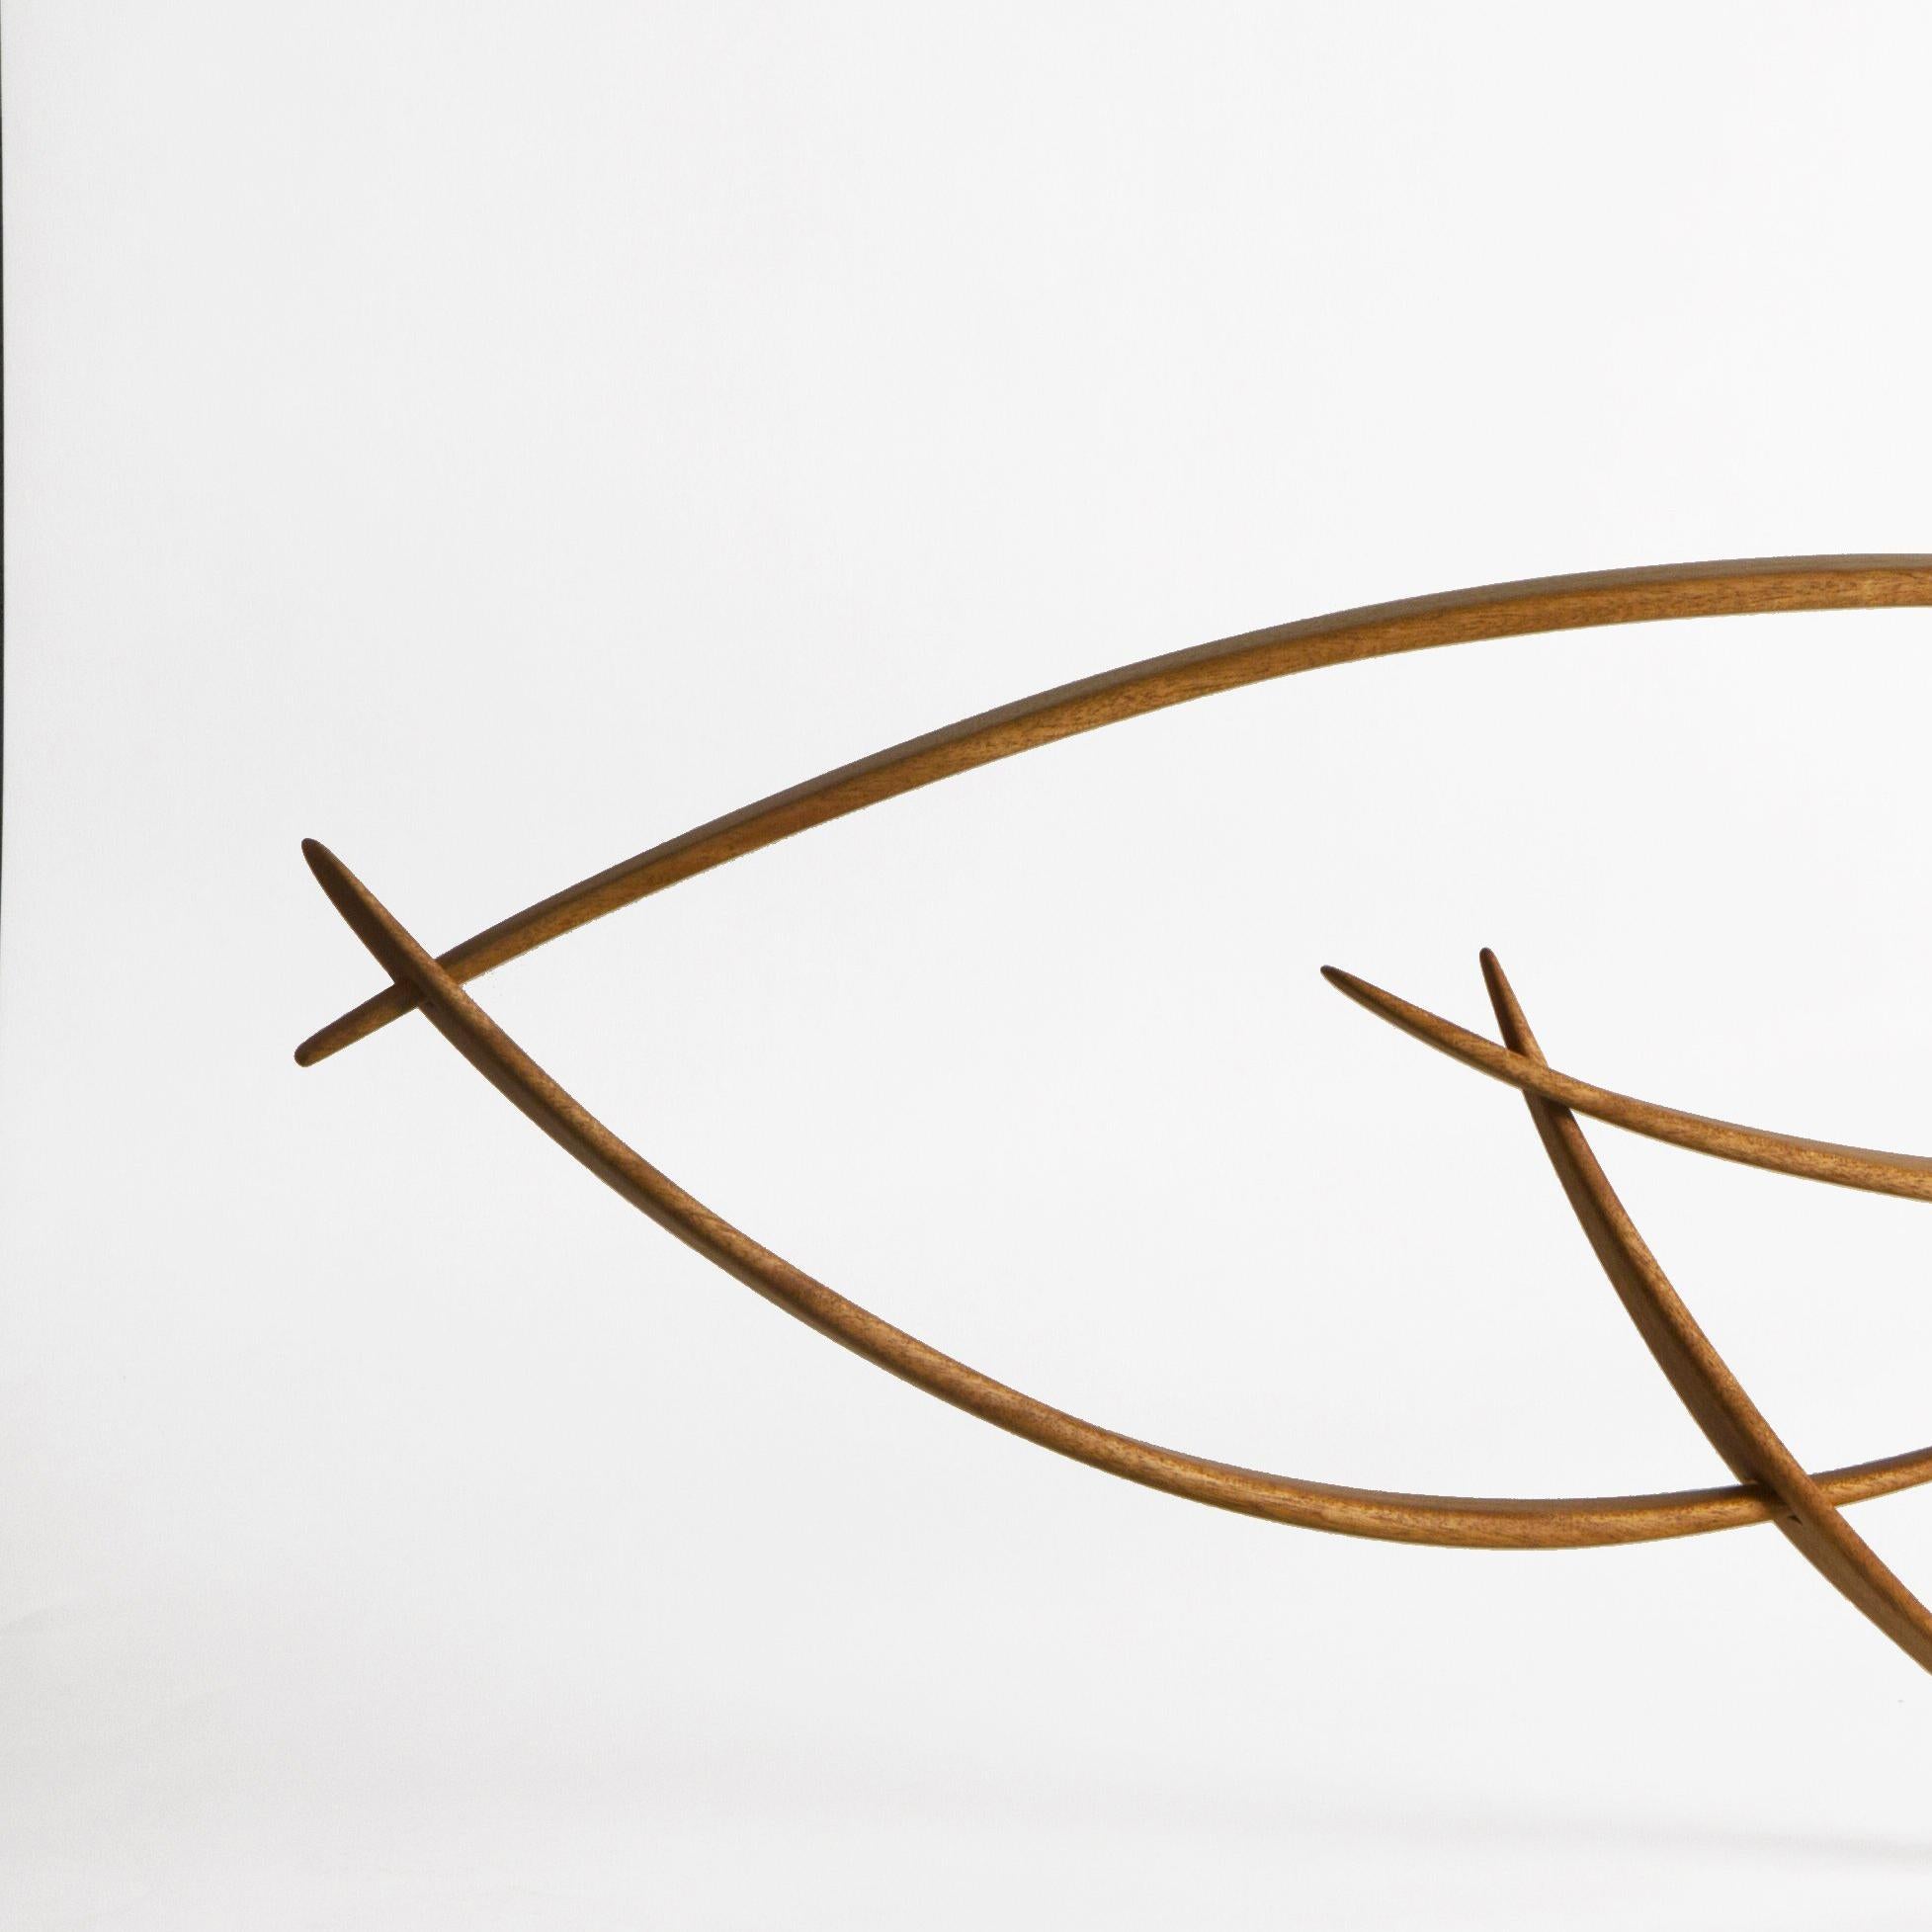 Reaching Left and Right - Brown Abstract Sculpture by Will Clift